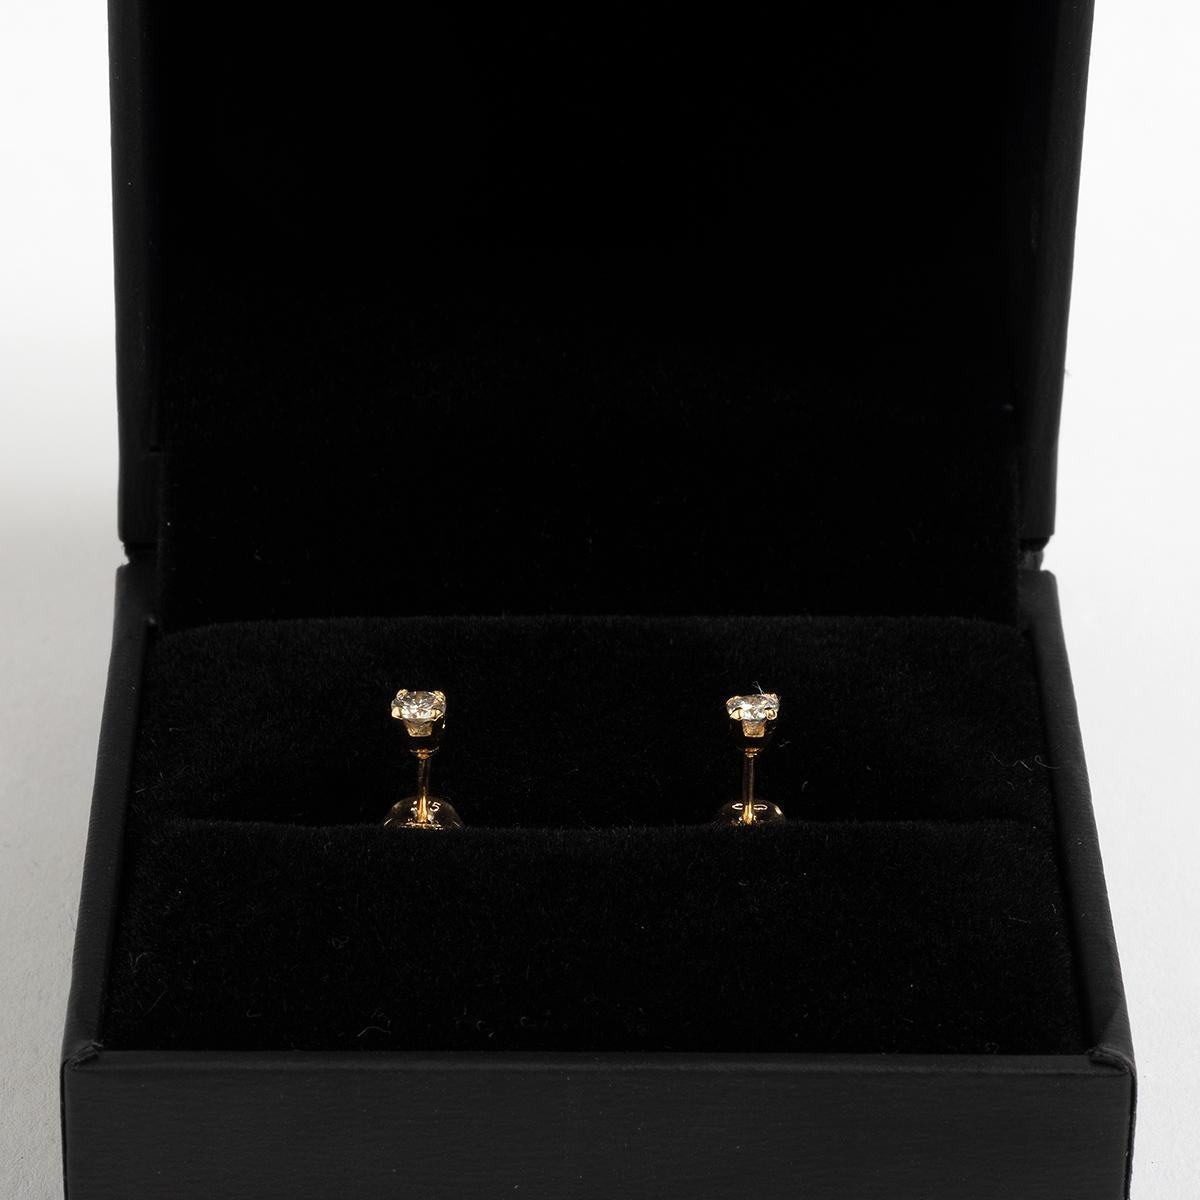 Our classic diamond ear studs in 9k yellow gold feature diamond solitaires of est. .20ct